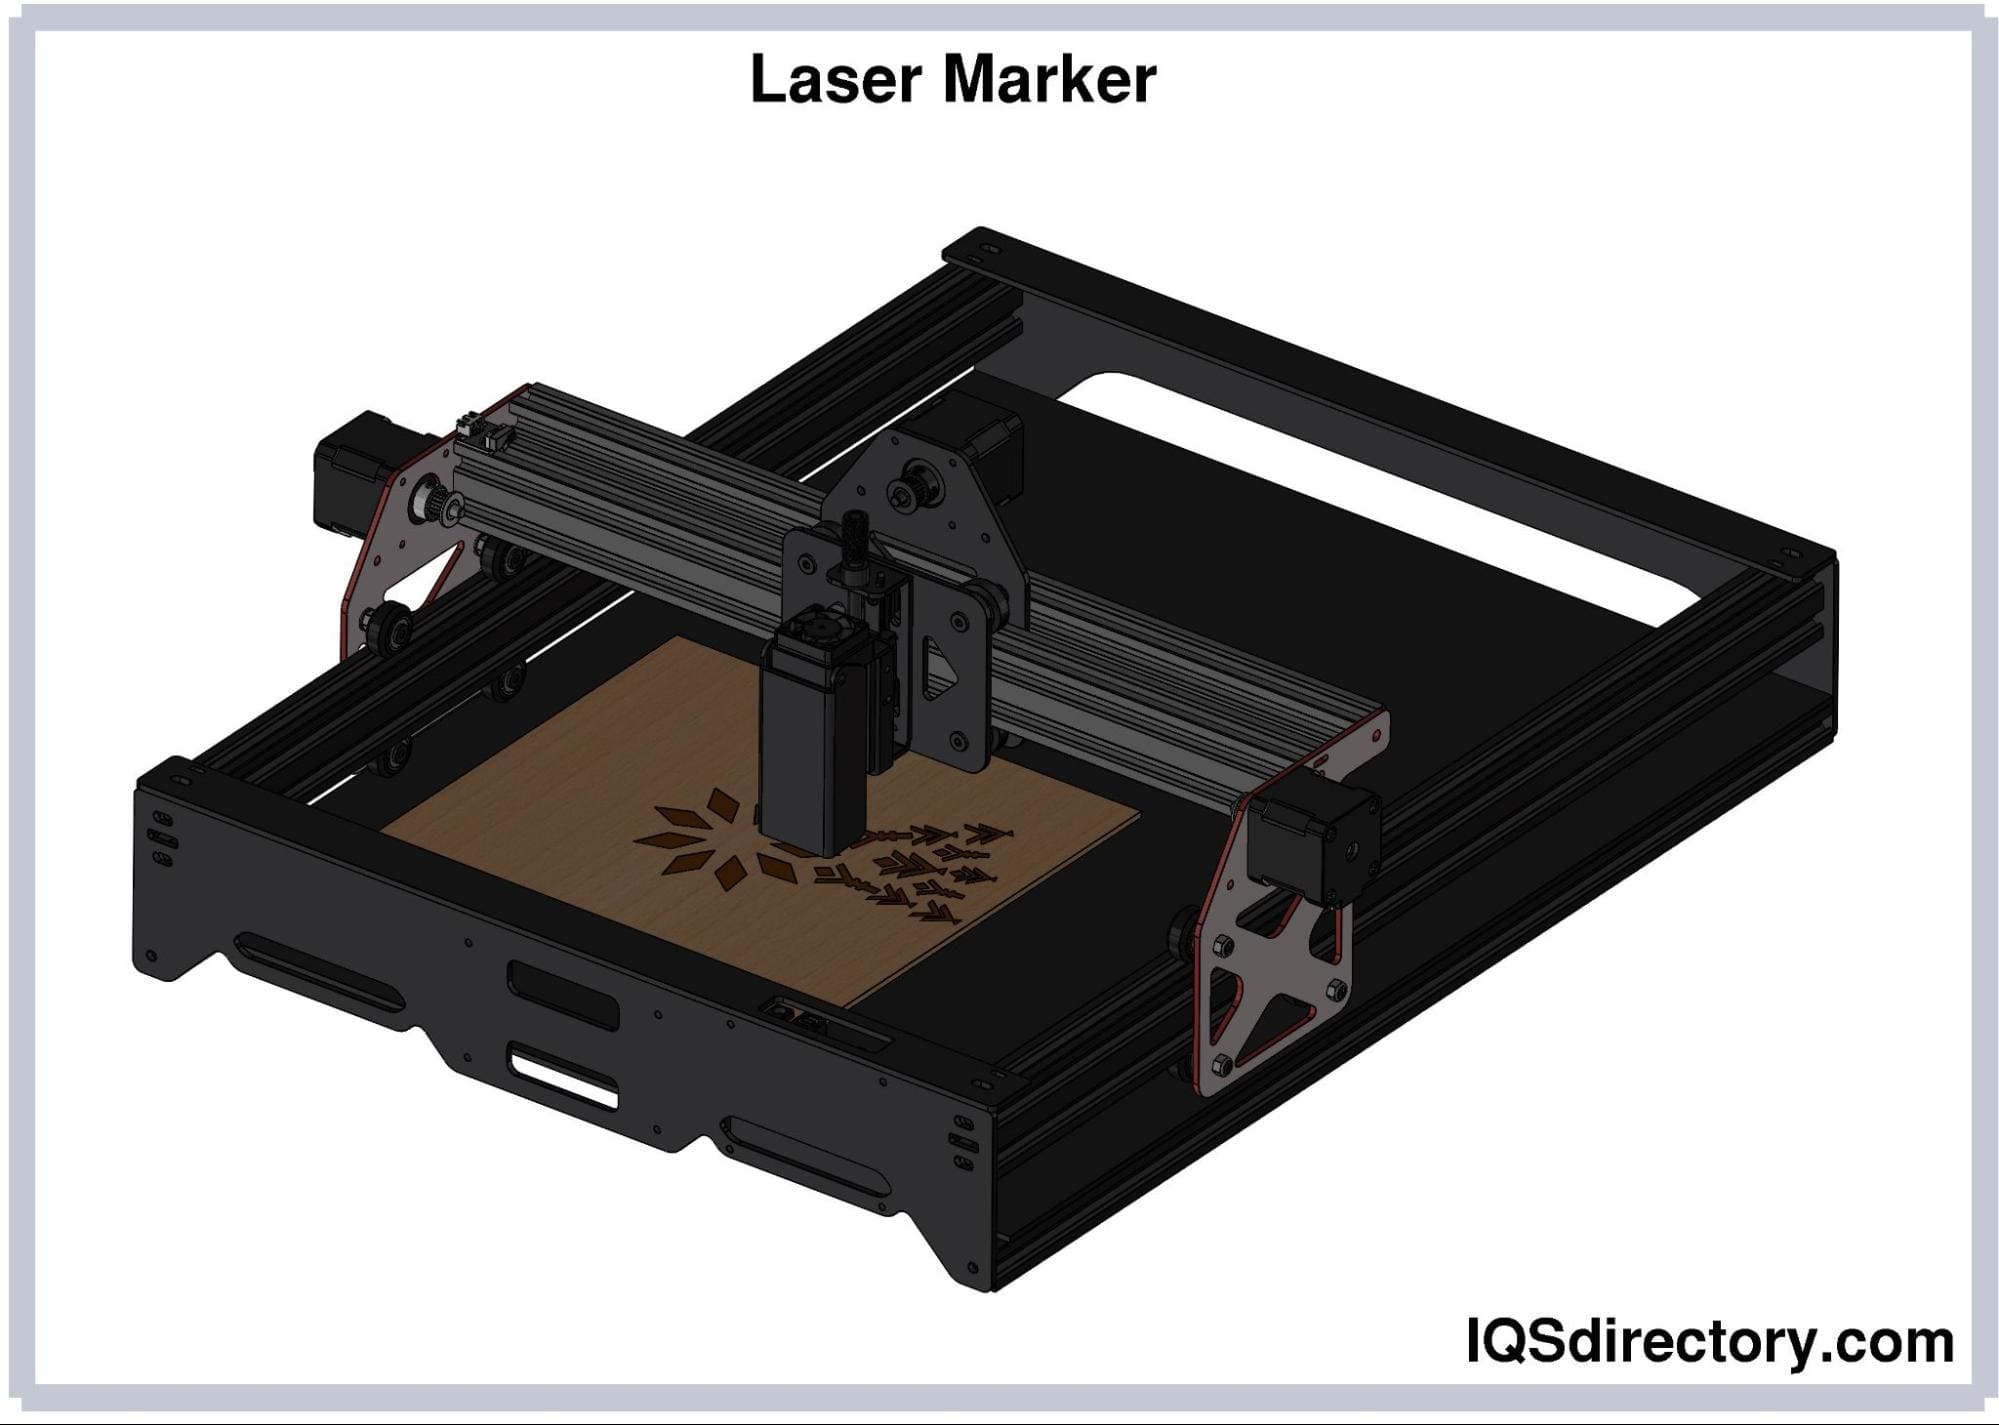 Why Laser Marking is so useful in Packaging Industry?